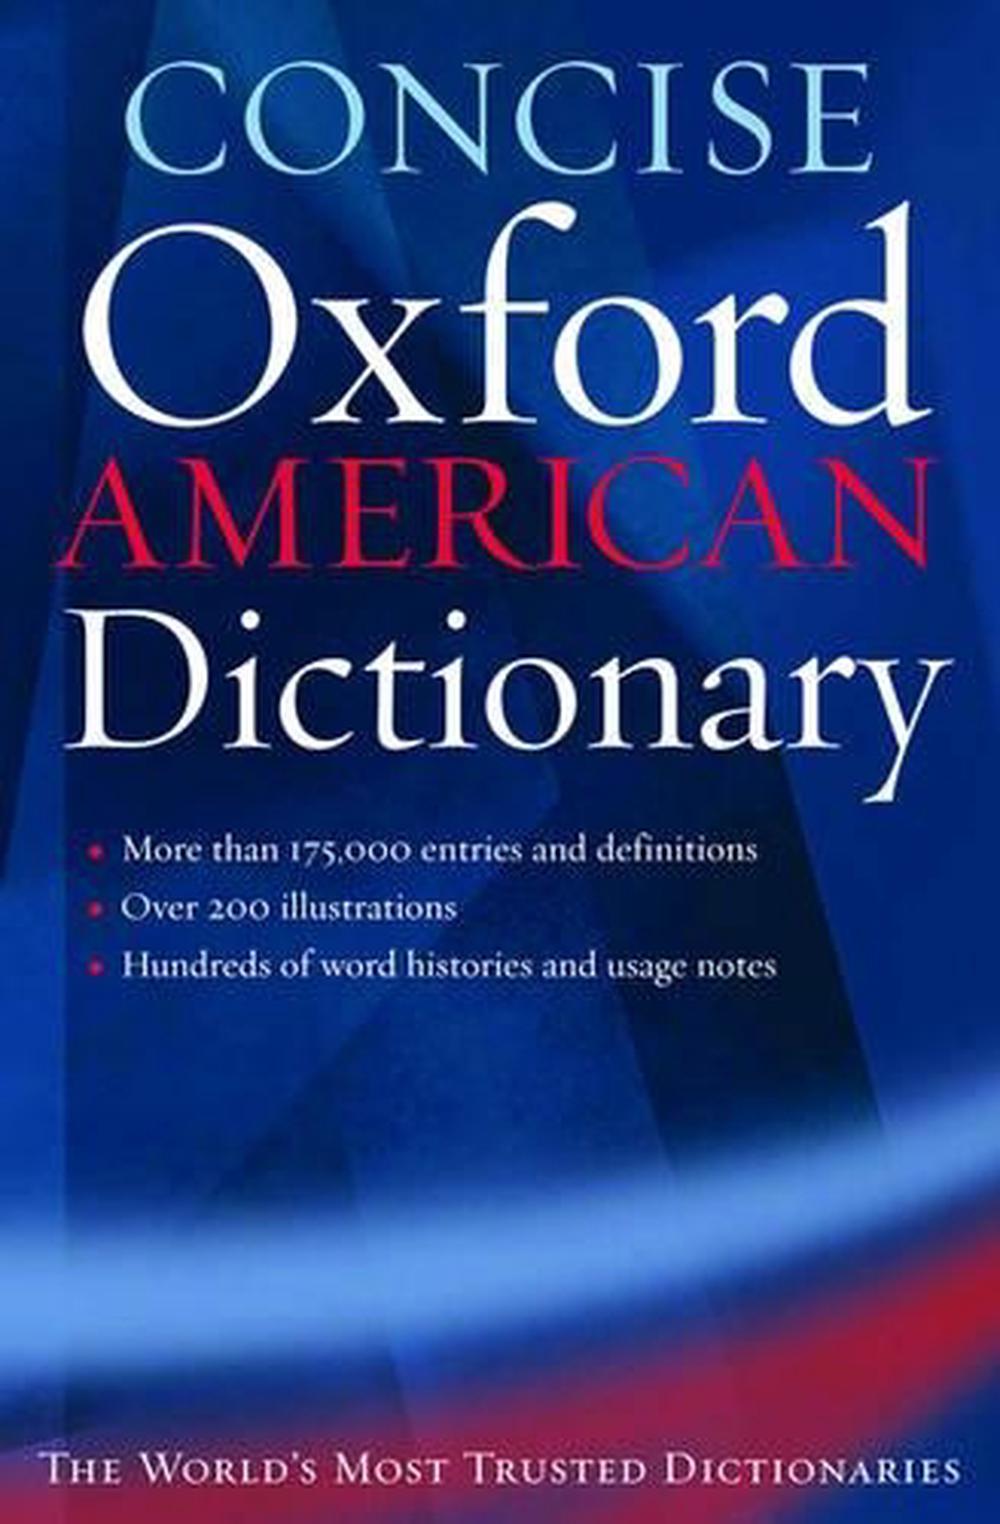 dissertation meaning oxford dictionary